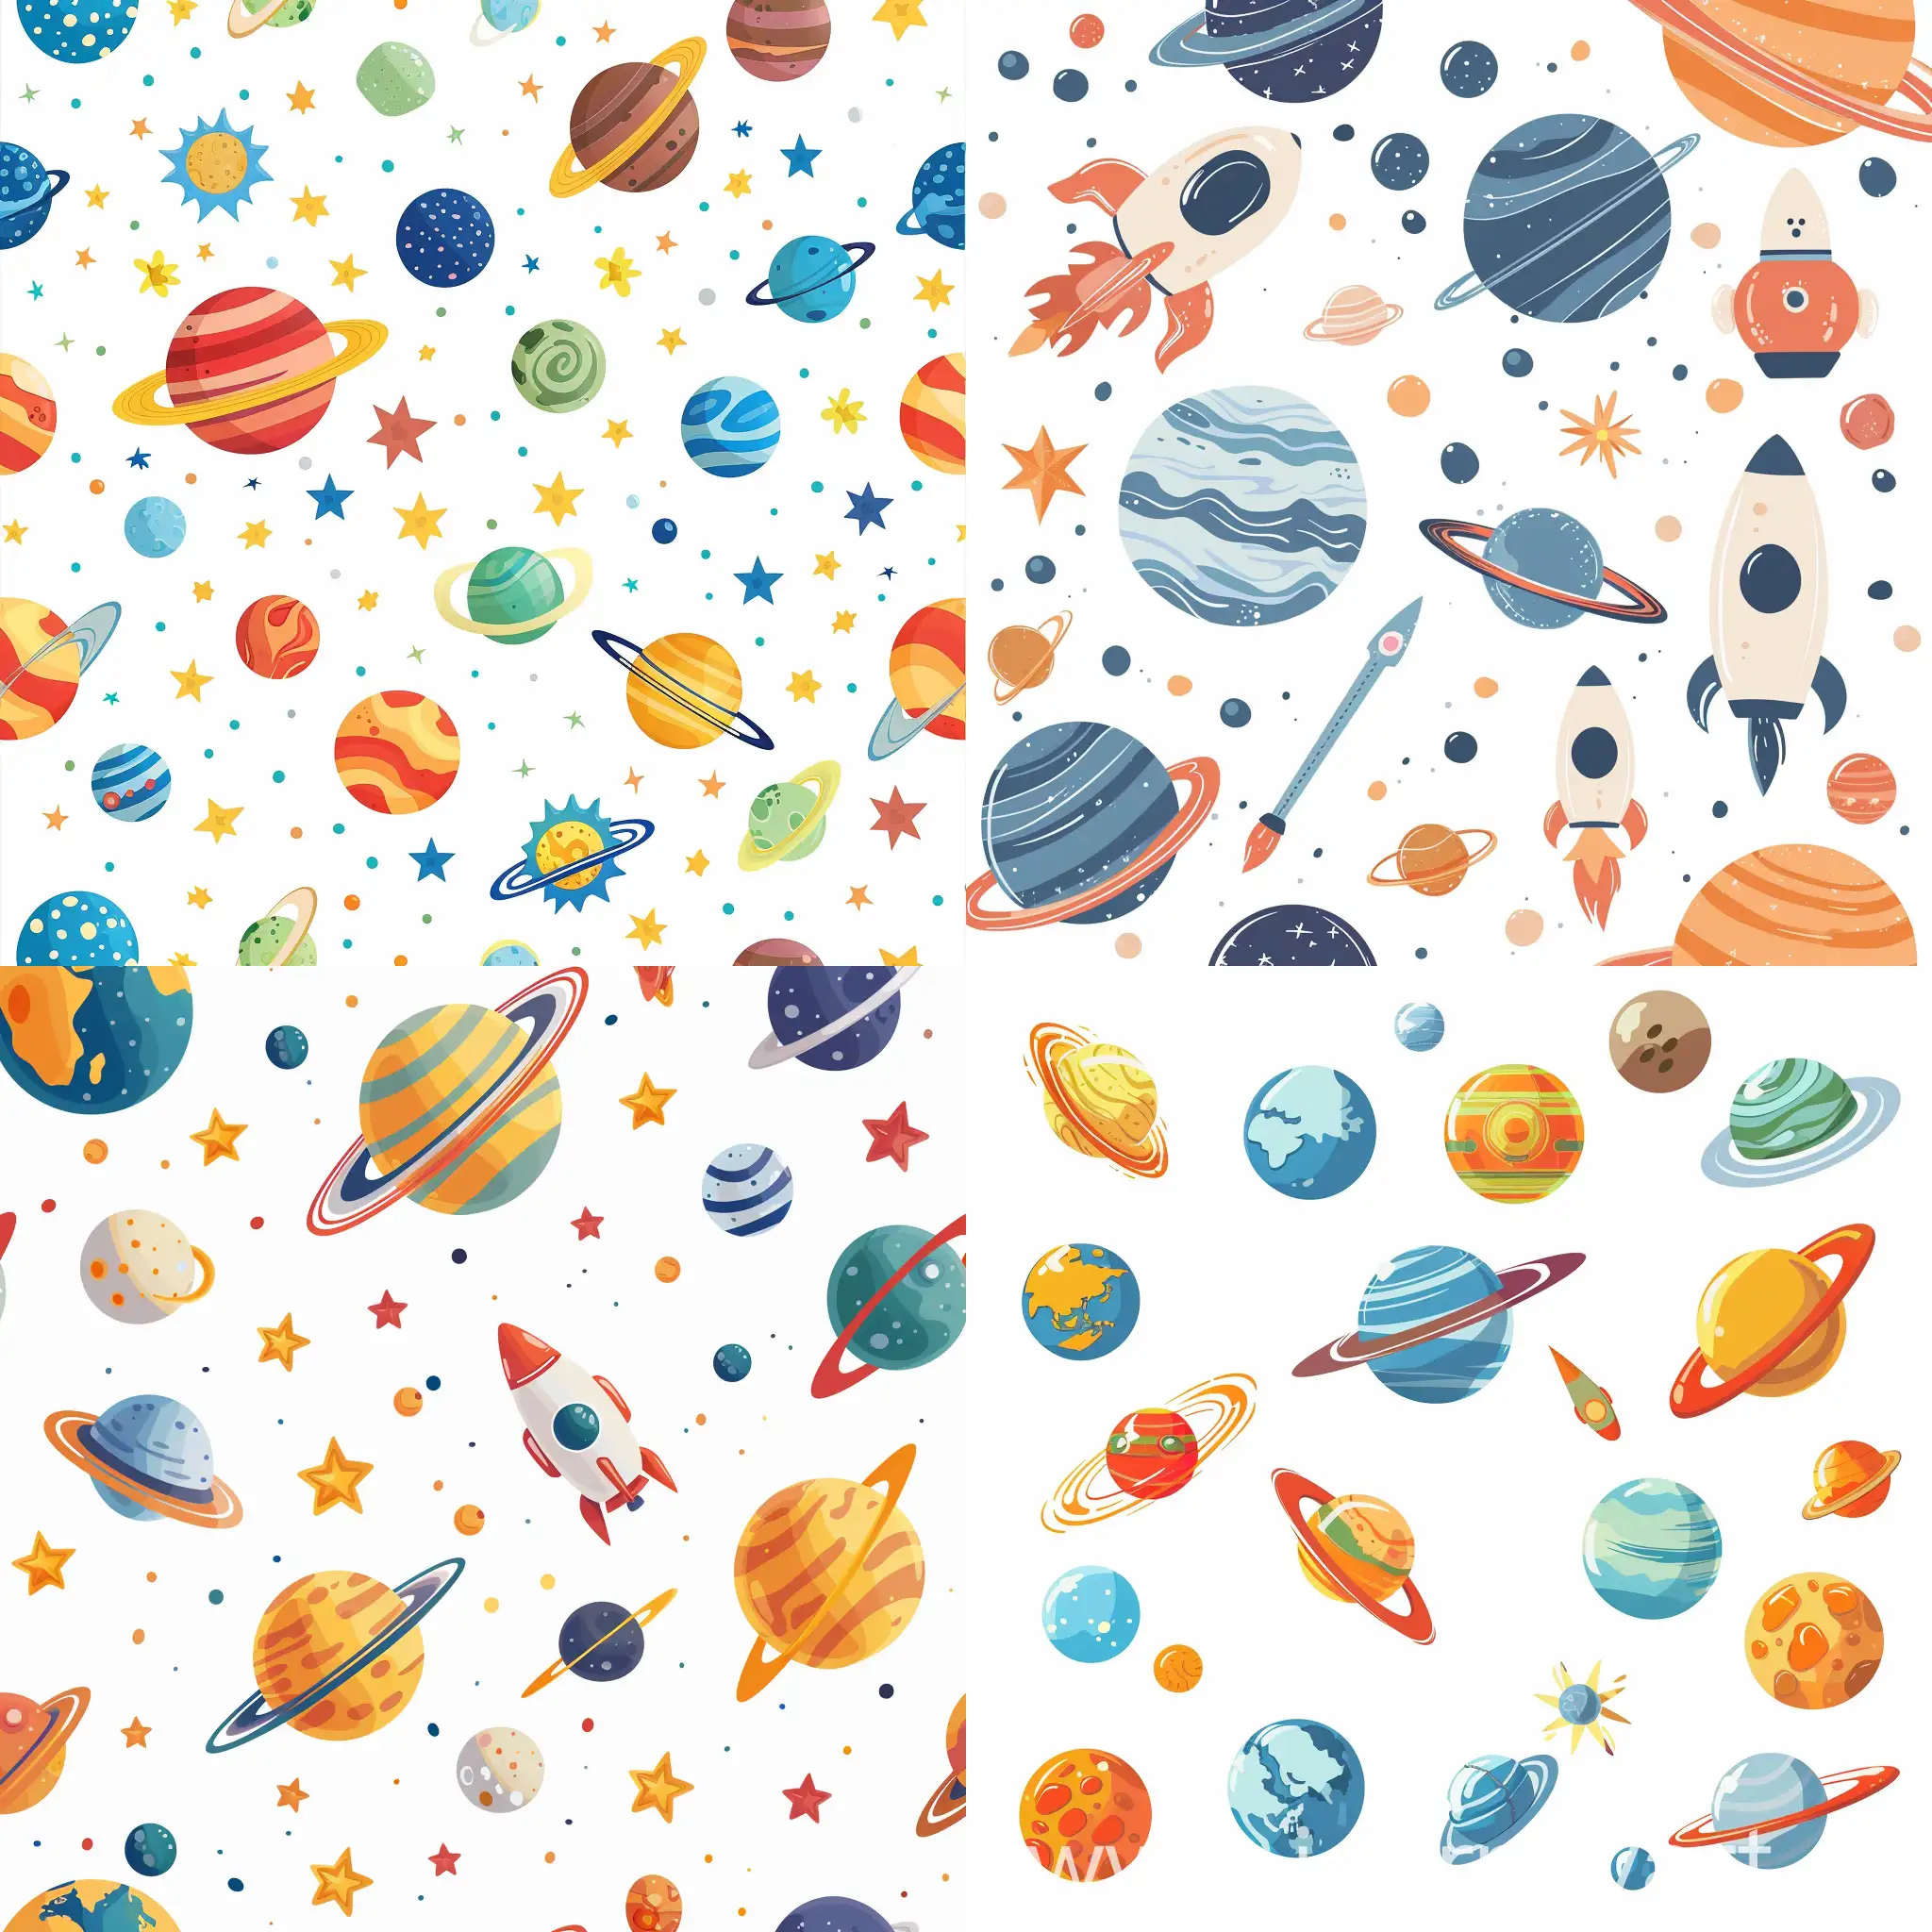 Cute-2D-Planets-and-Space-Objects-on-White-Background